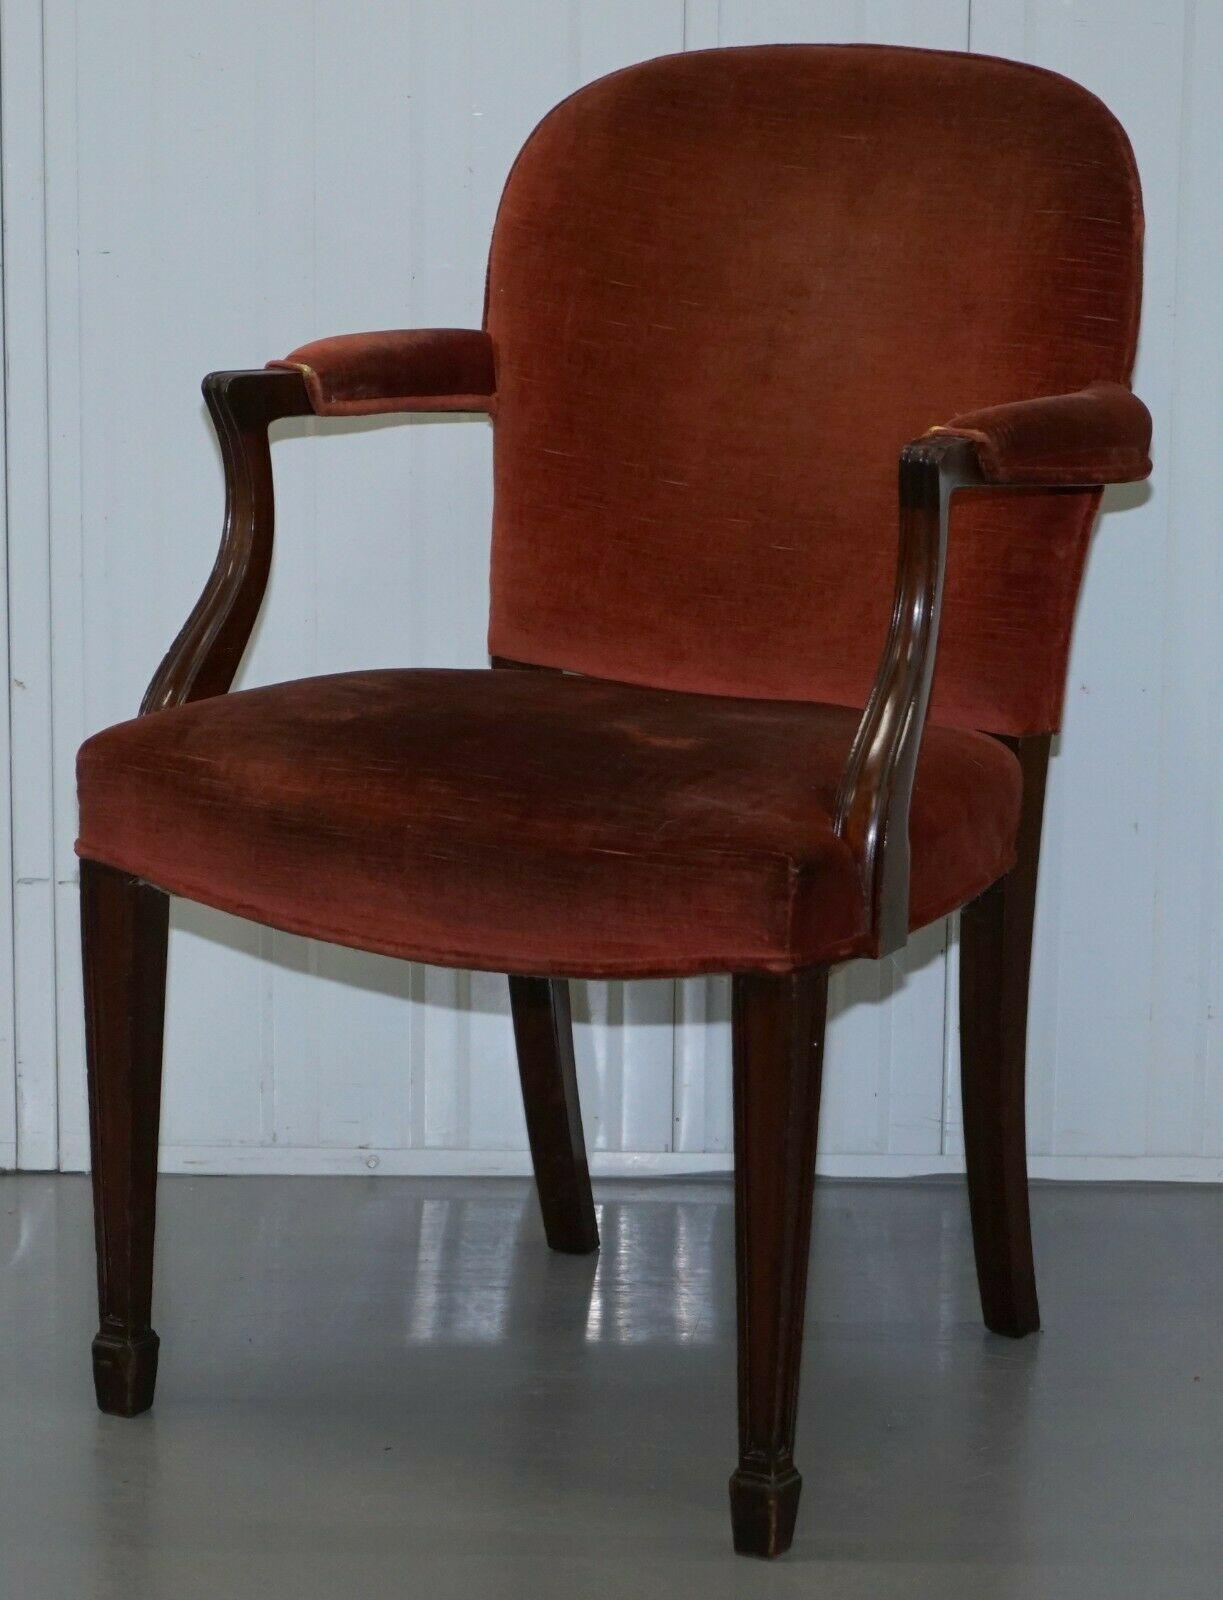 Hand-Crafted Rare Antique Victorian J.Brand Stamped Armchair Horse Hair Filled Coil Sprung